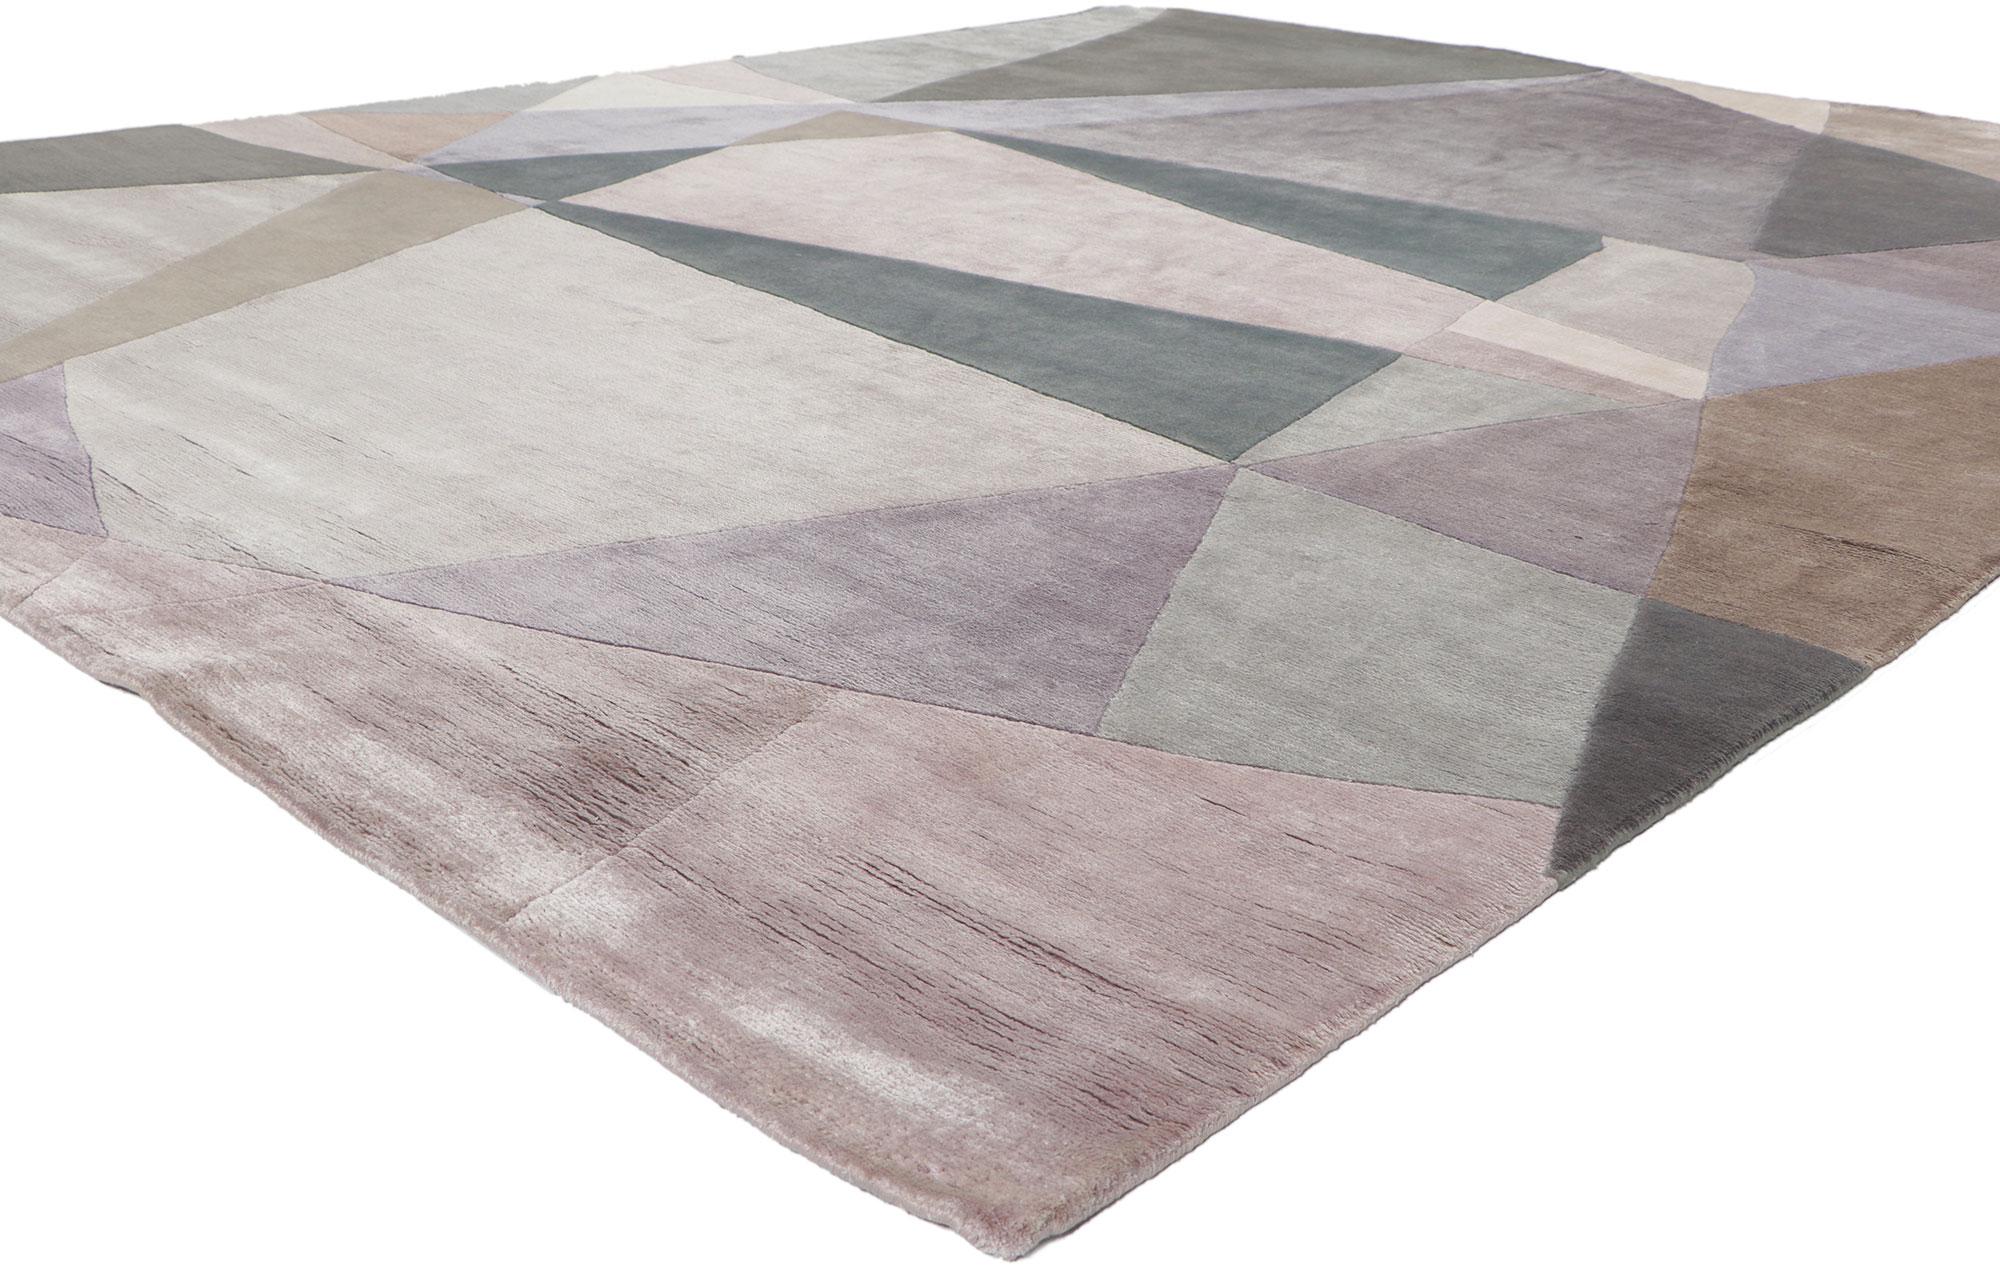 30884 New Contemporary Abstract Rug, 08'00 x 09'10. Drawing inspiration from Theo van Doesburg and Sonia Delaunay, this hand knotted wool contemporary rug is the perfect balance of Cubist style and Abstract Expressionism. The bold geometric pattern